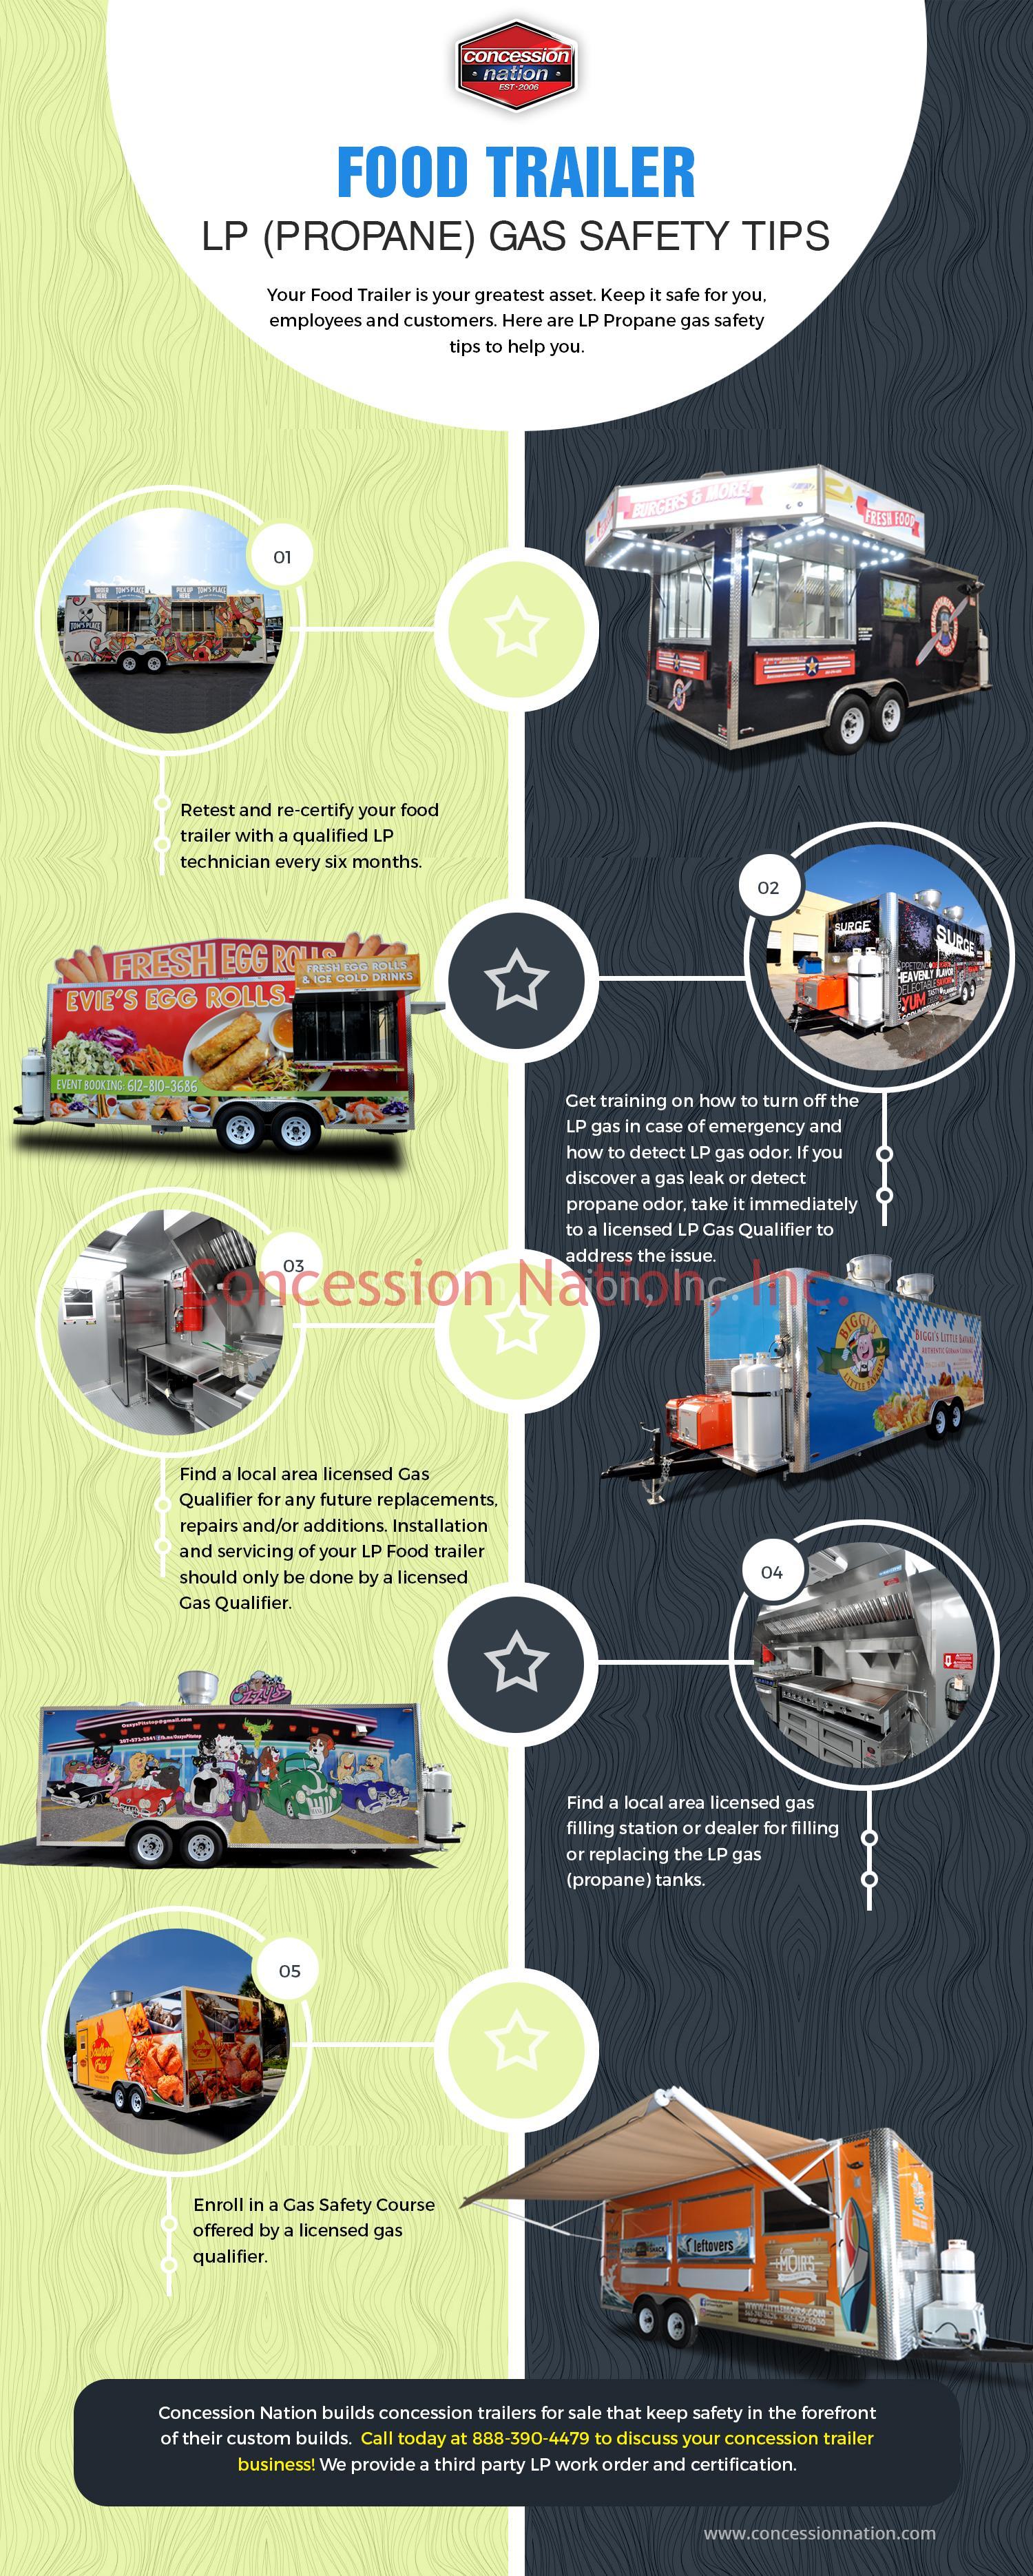 5 Concession Trailer LP Propane Gas Safety Tips